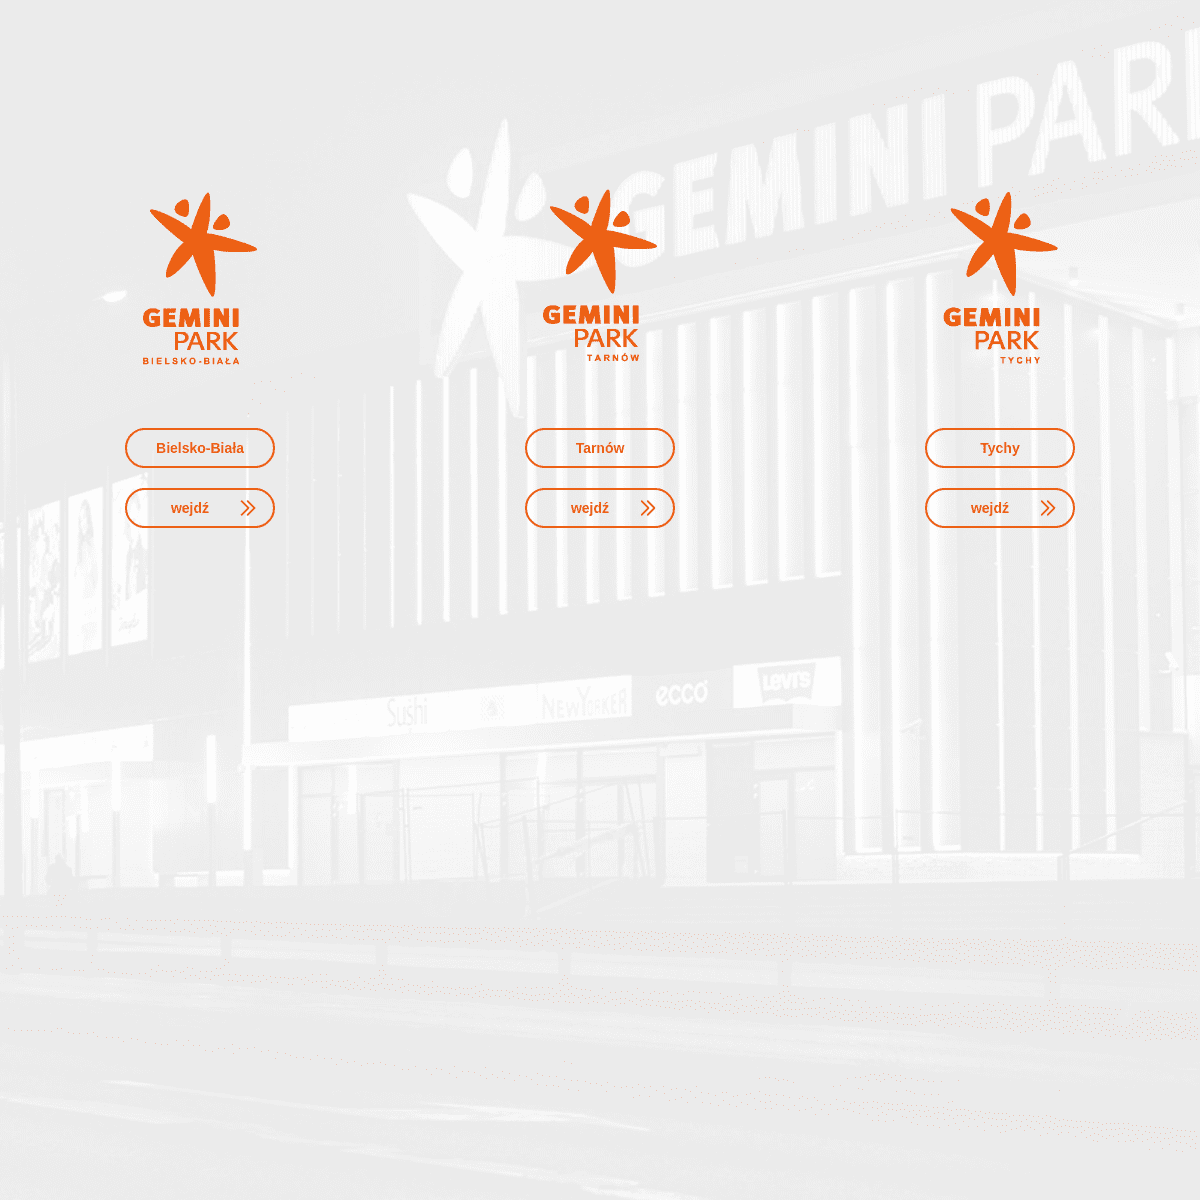 A complete backup of geminipark.pl